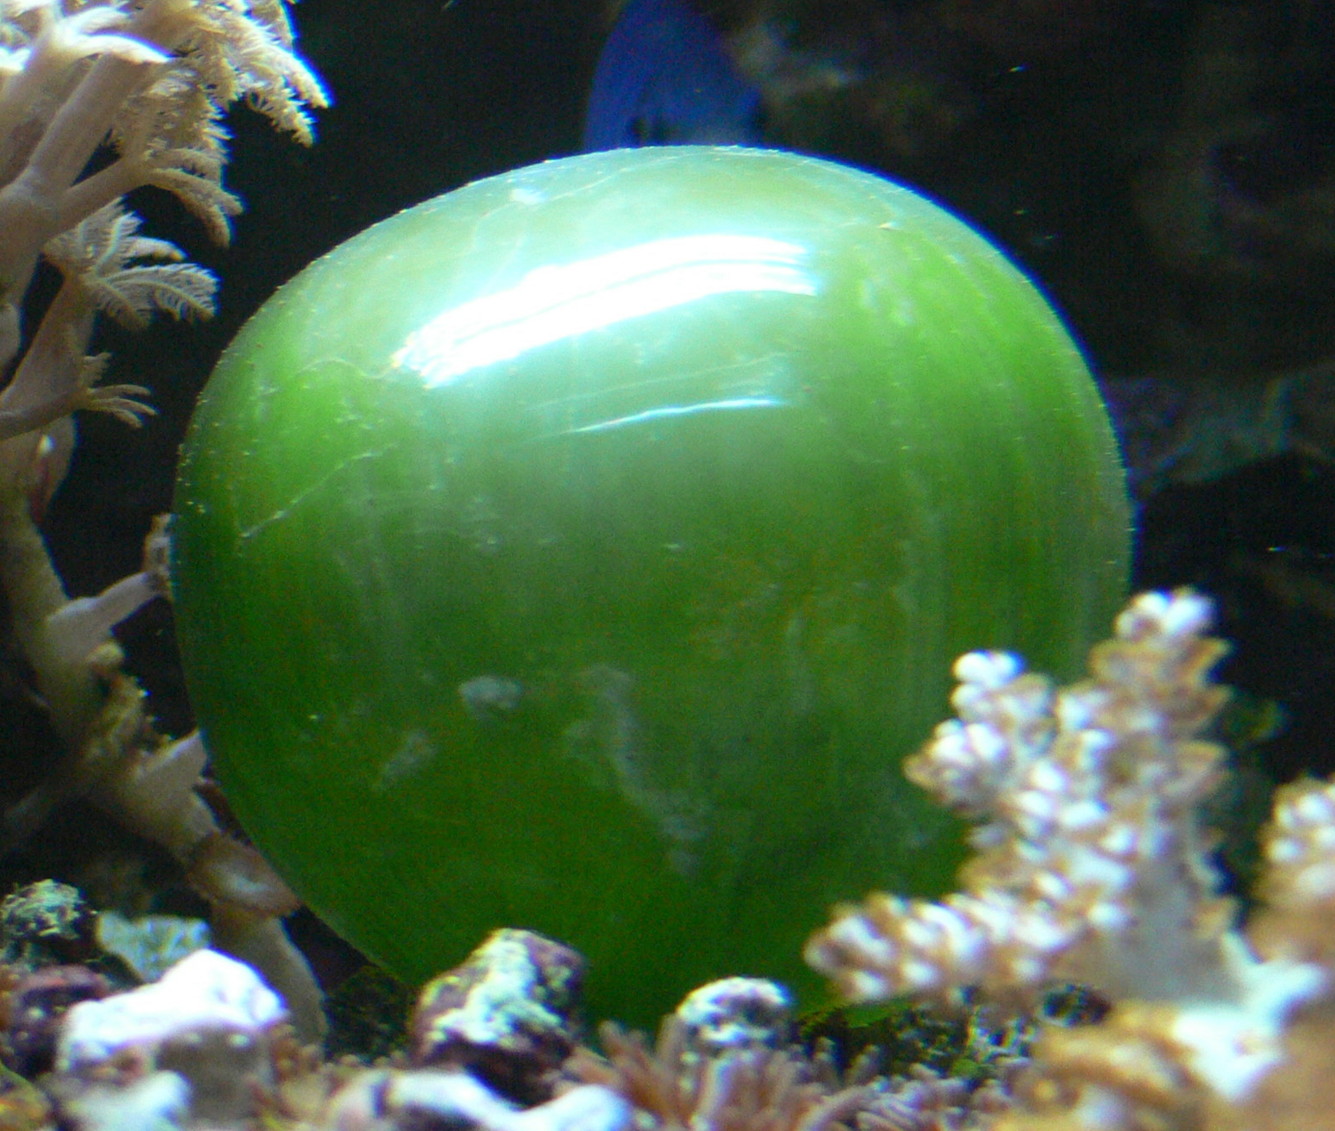 A giant cell of green-colored Valonia Ventricosa in the sea